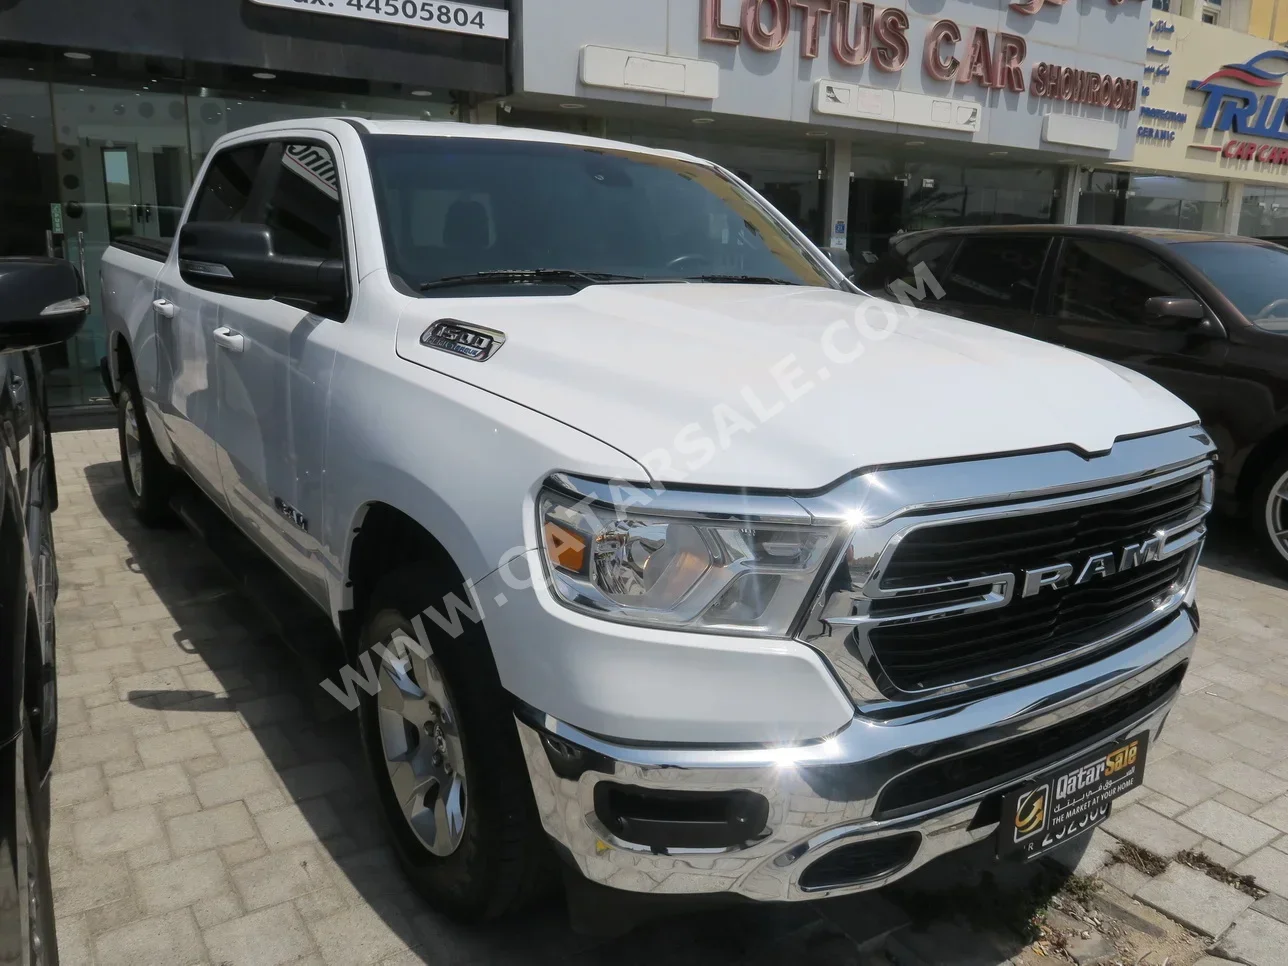  Dodge  Ram  Big Horn  2021  Automatic  34,000 Km  8 Cylinder  Four Wheel Drive (4WD)  Pick Up  White  With Warranty